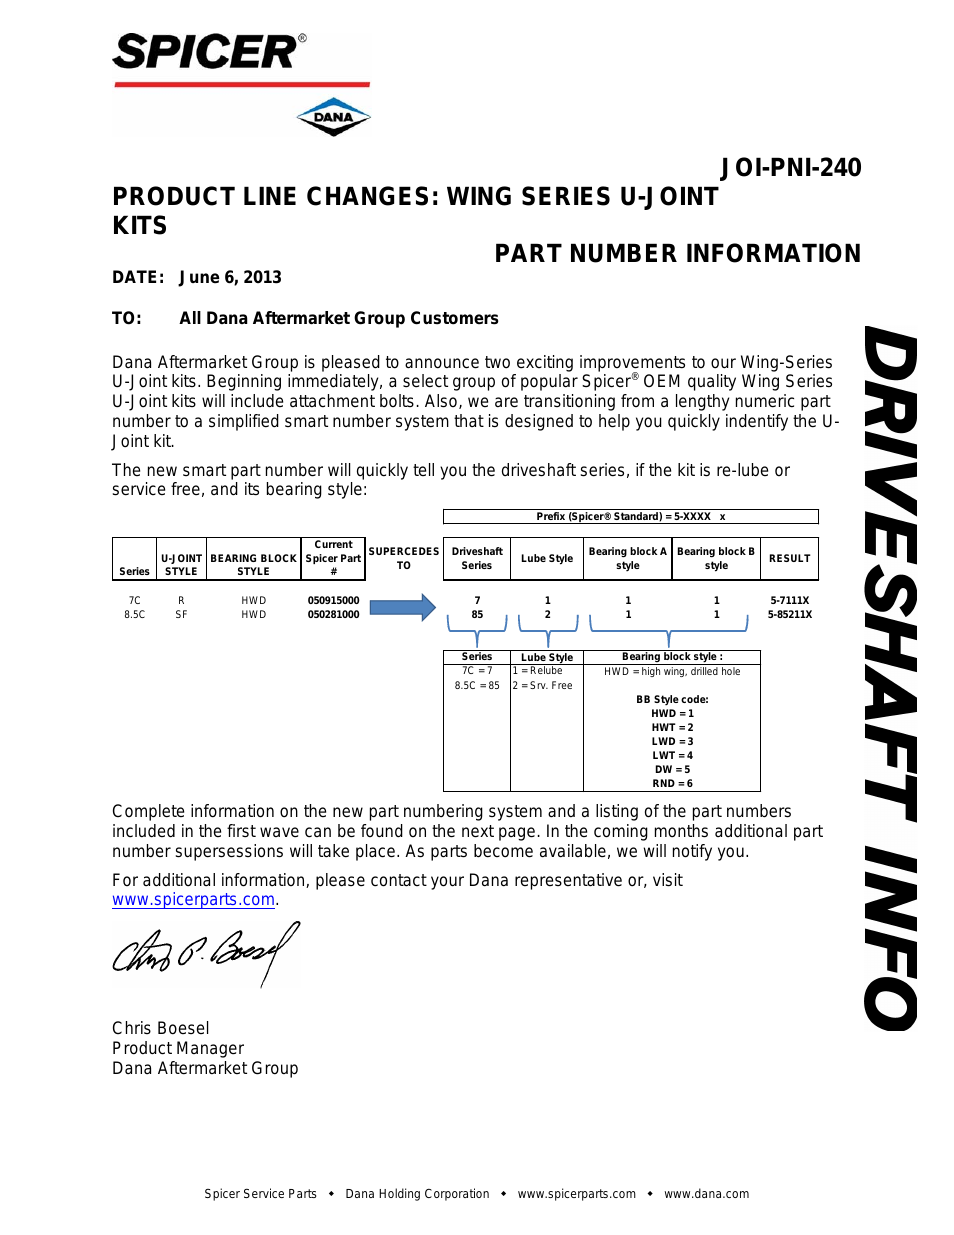 PRODUCT LINE CHANGES: WING SERIES U-JOINT KITS